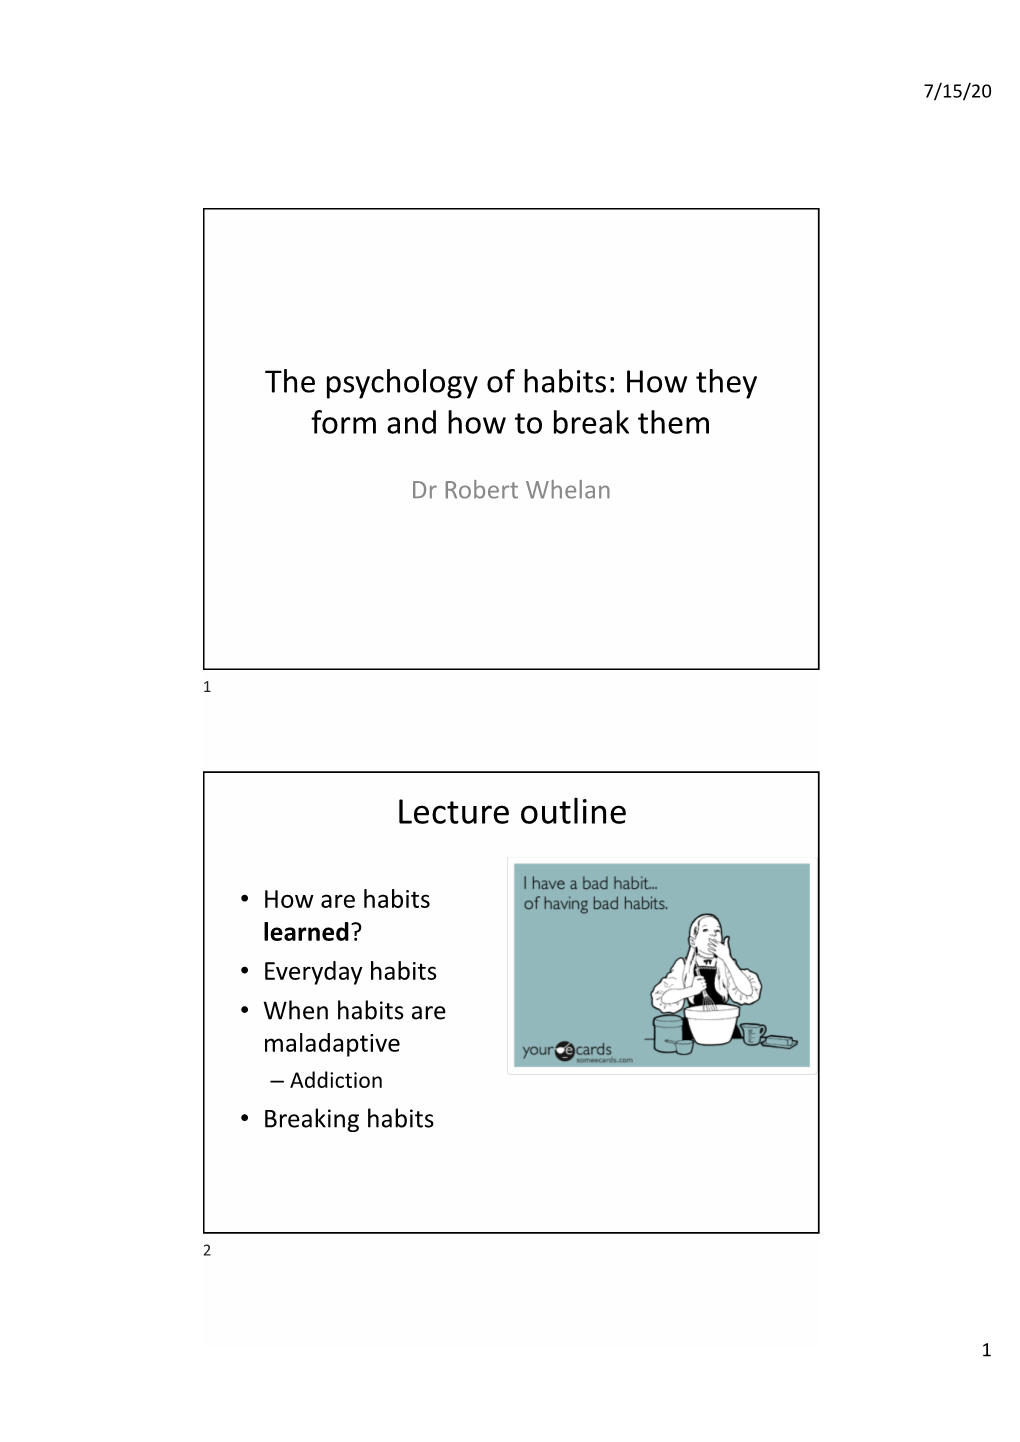 The Psychology of Habits: How They Form and How to Break Them